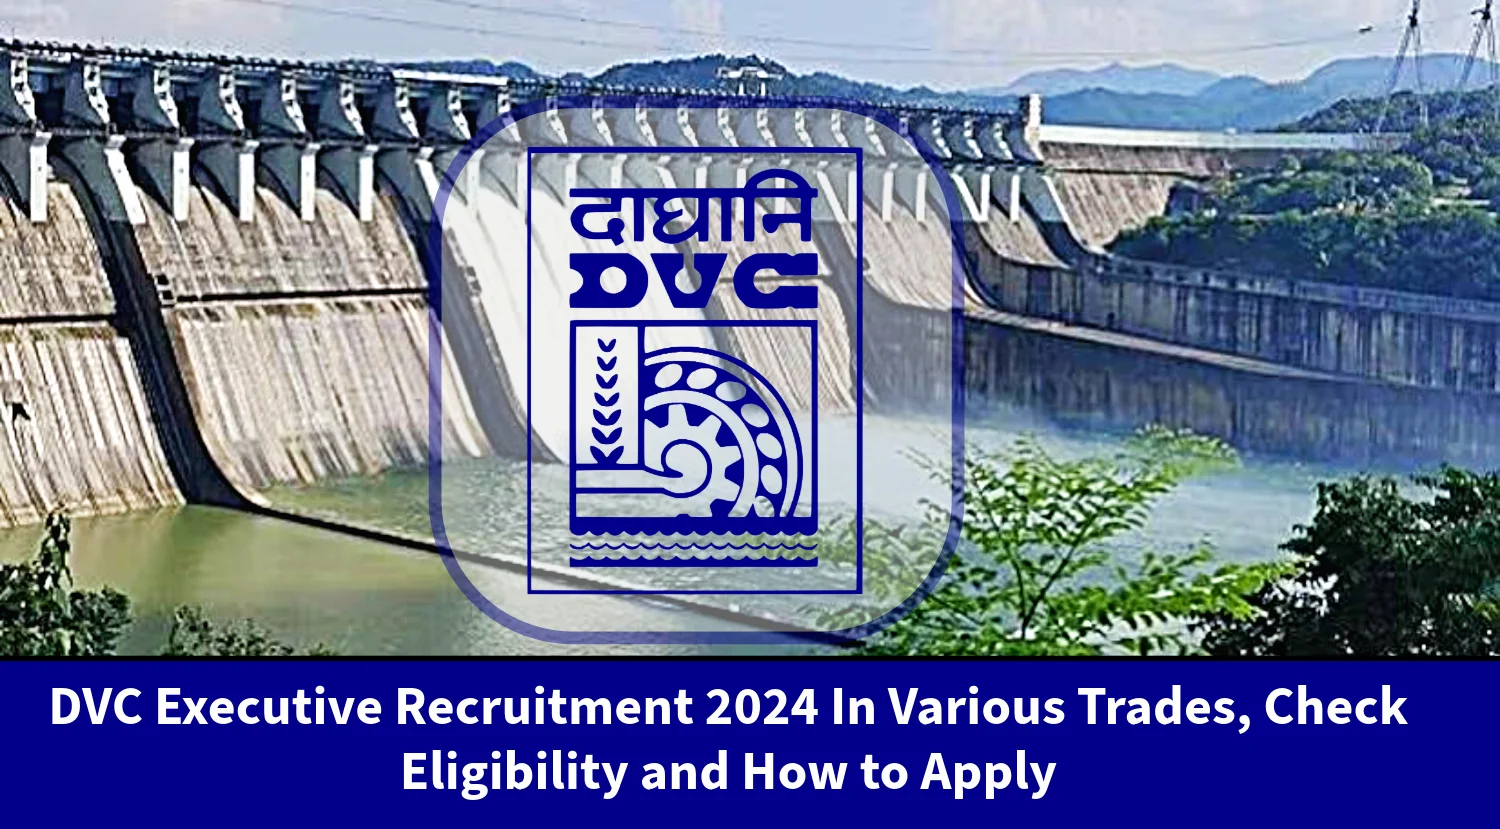 DVC Executive Recruitment 2024 In Various Trades, Check Eligibility and How to Apply